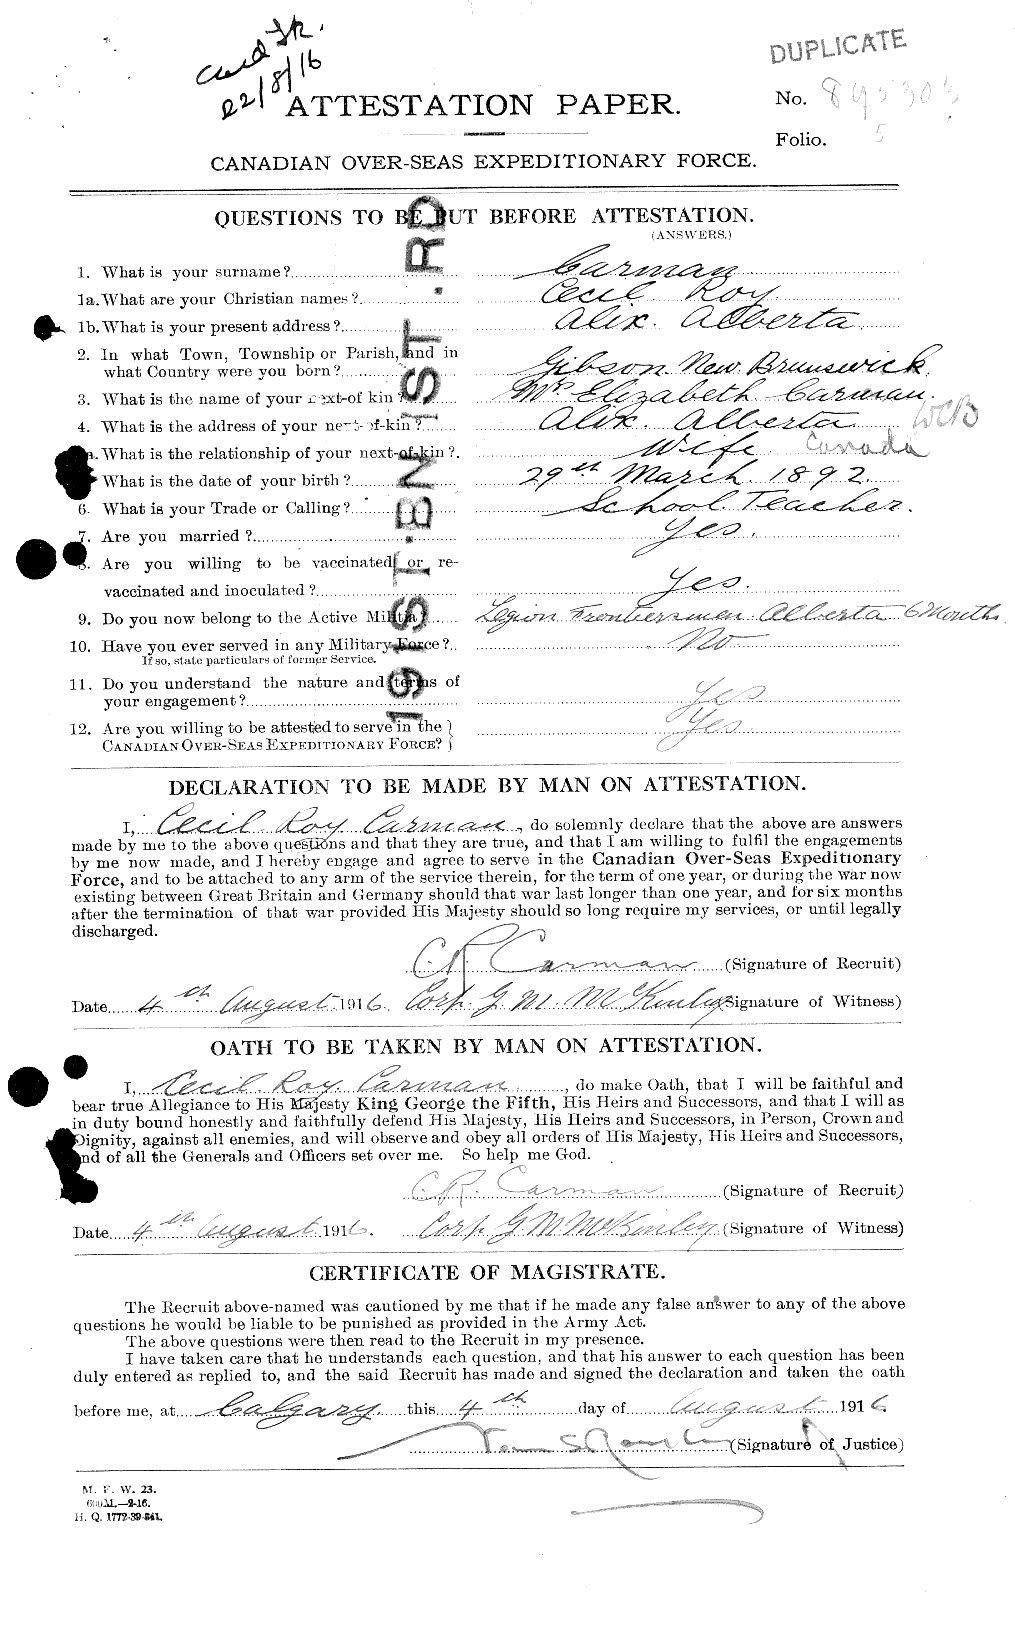 Personnel Records of the First World War - CEF 009778a